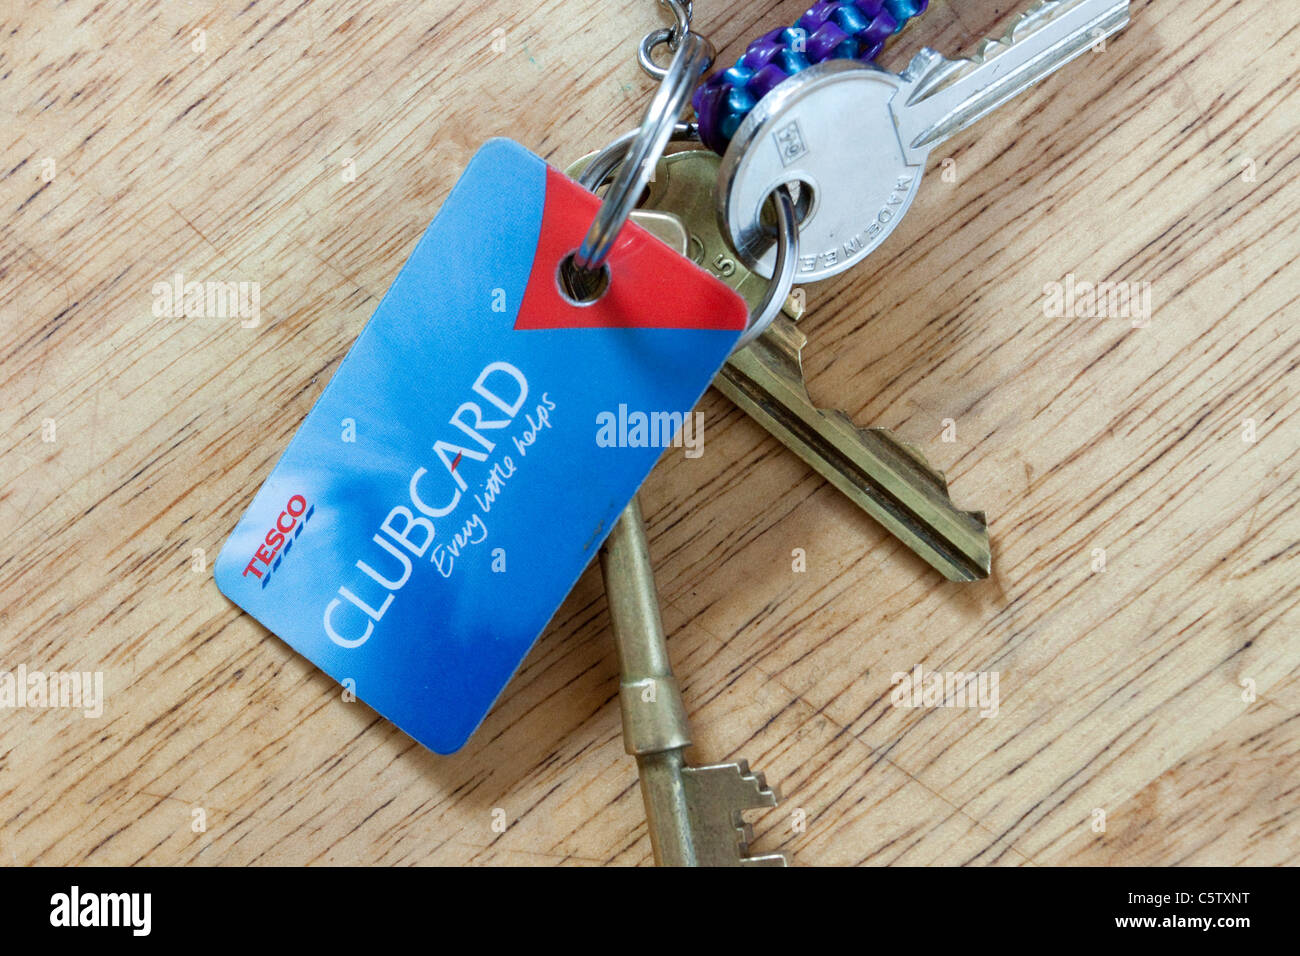 Tesco clubcard on a keyring with a bunch of keys on a wooden table, England, UK Stock Photo